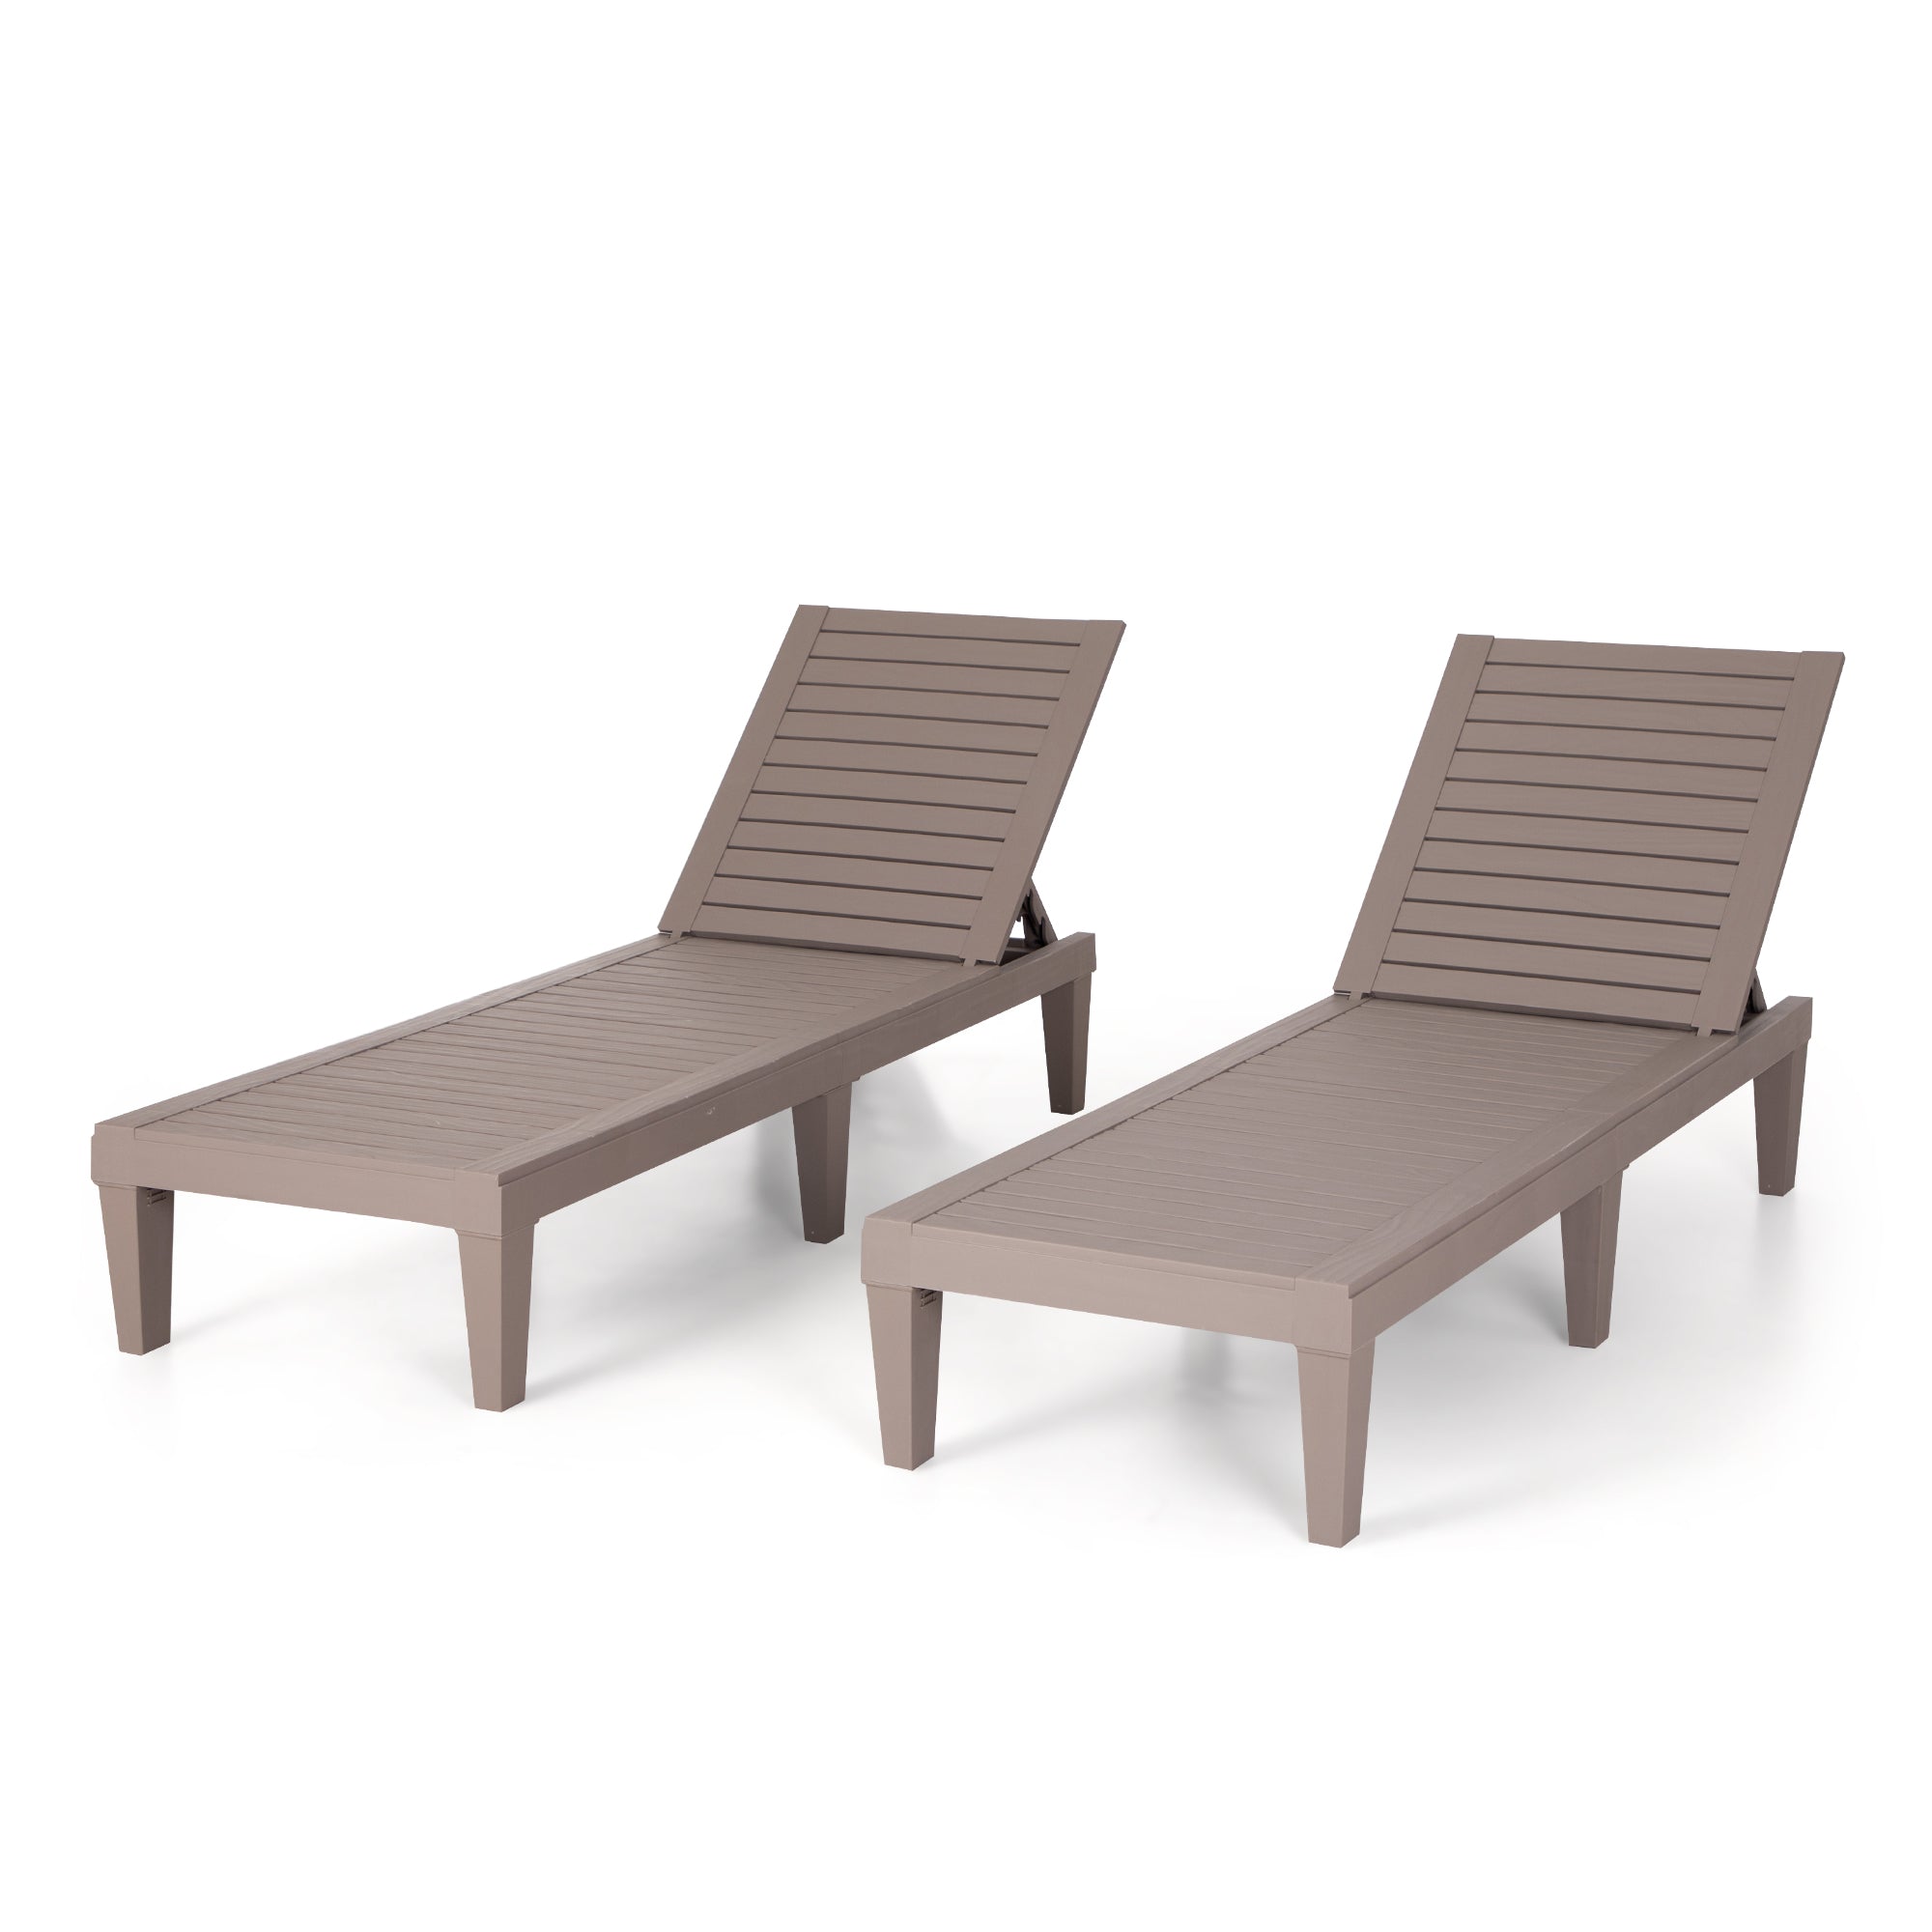 Sophia & William 2-Piece Plastic Outdoor Chaise Lounge Chairs